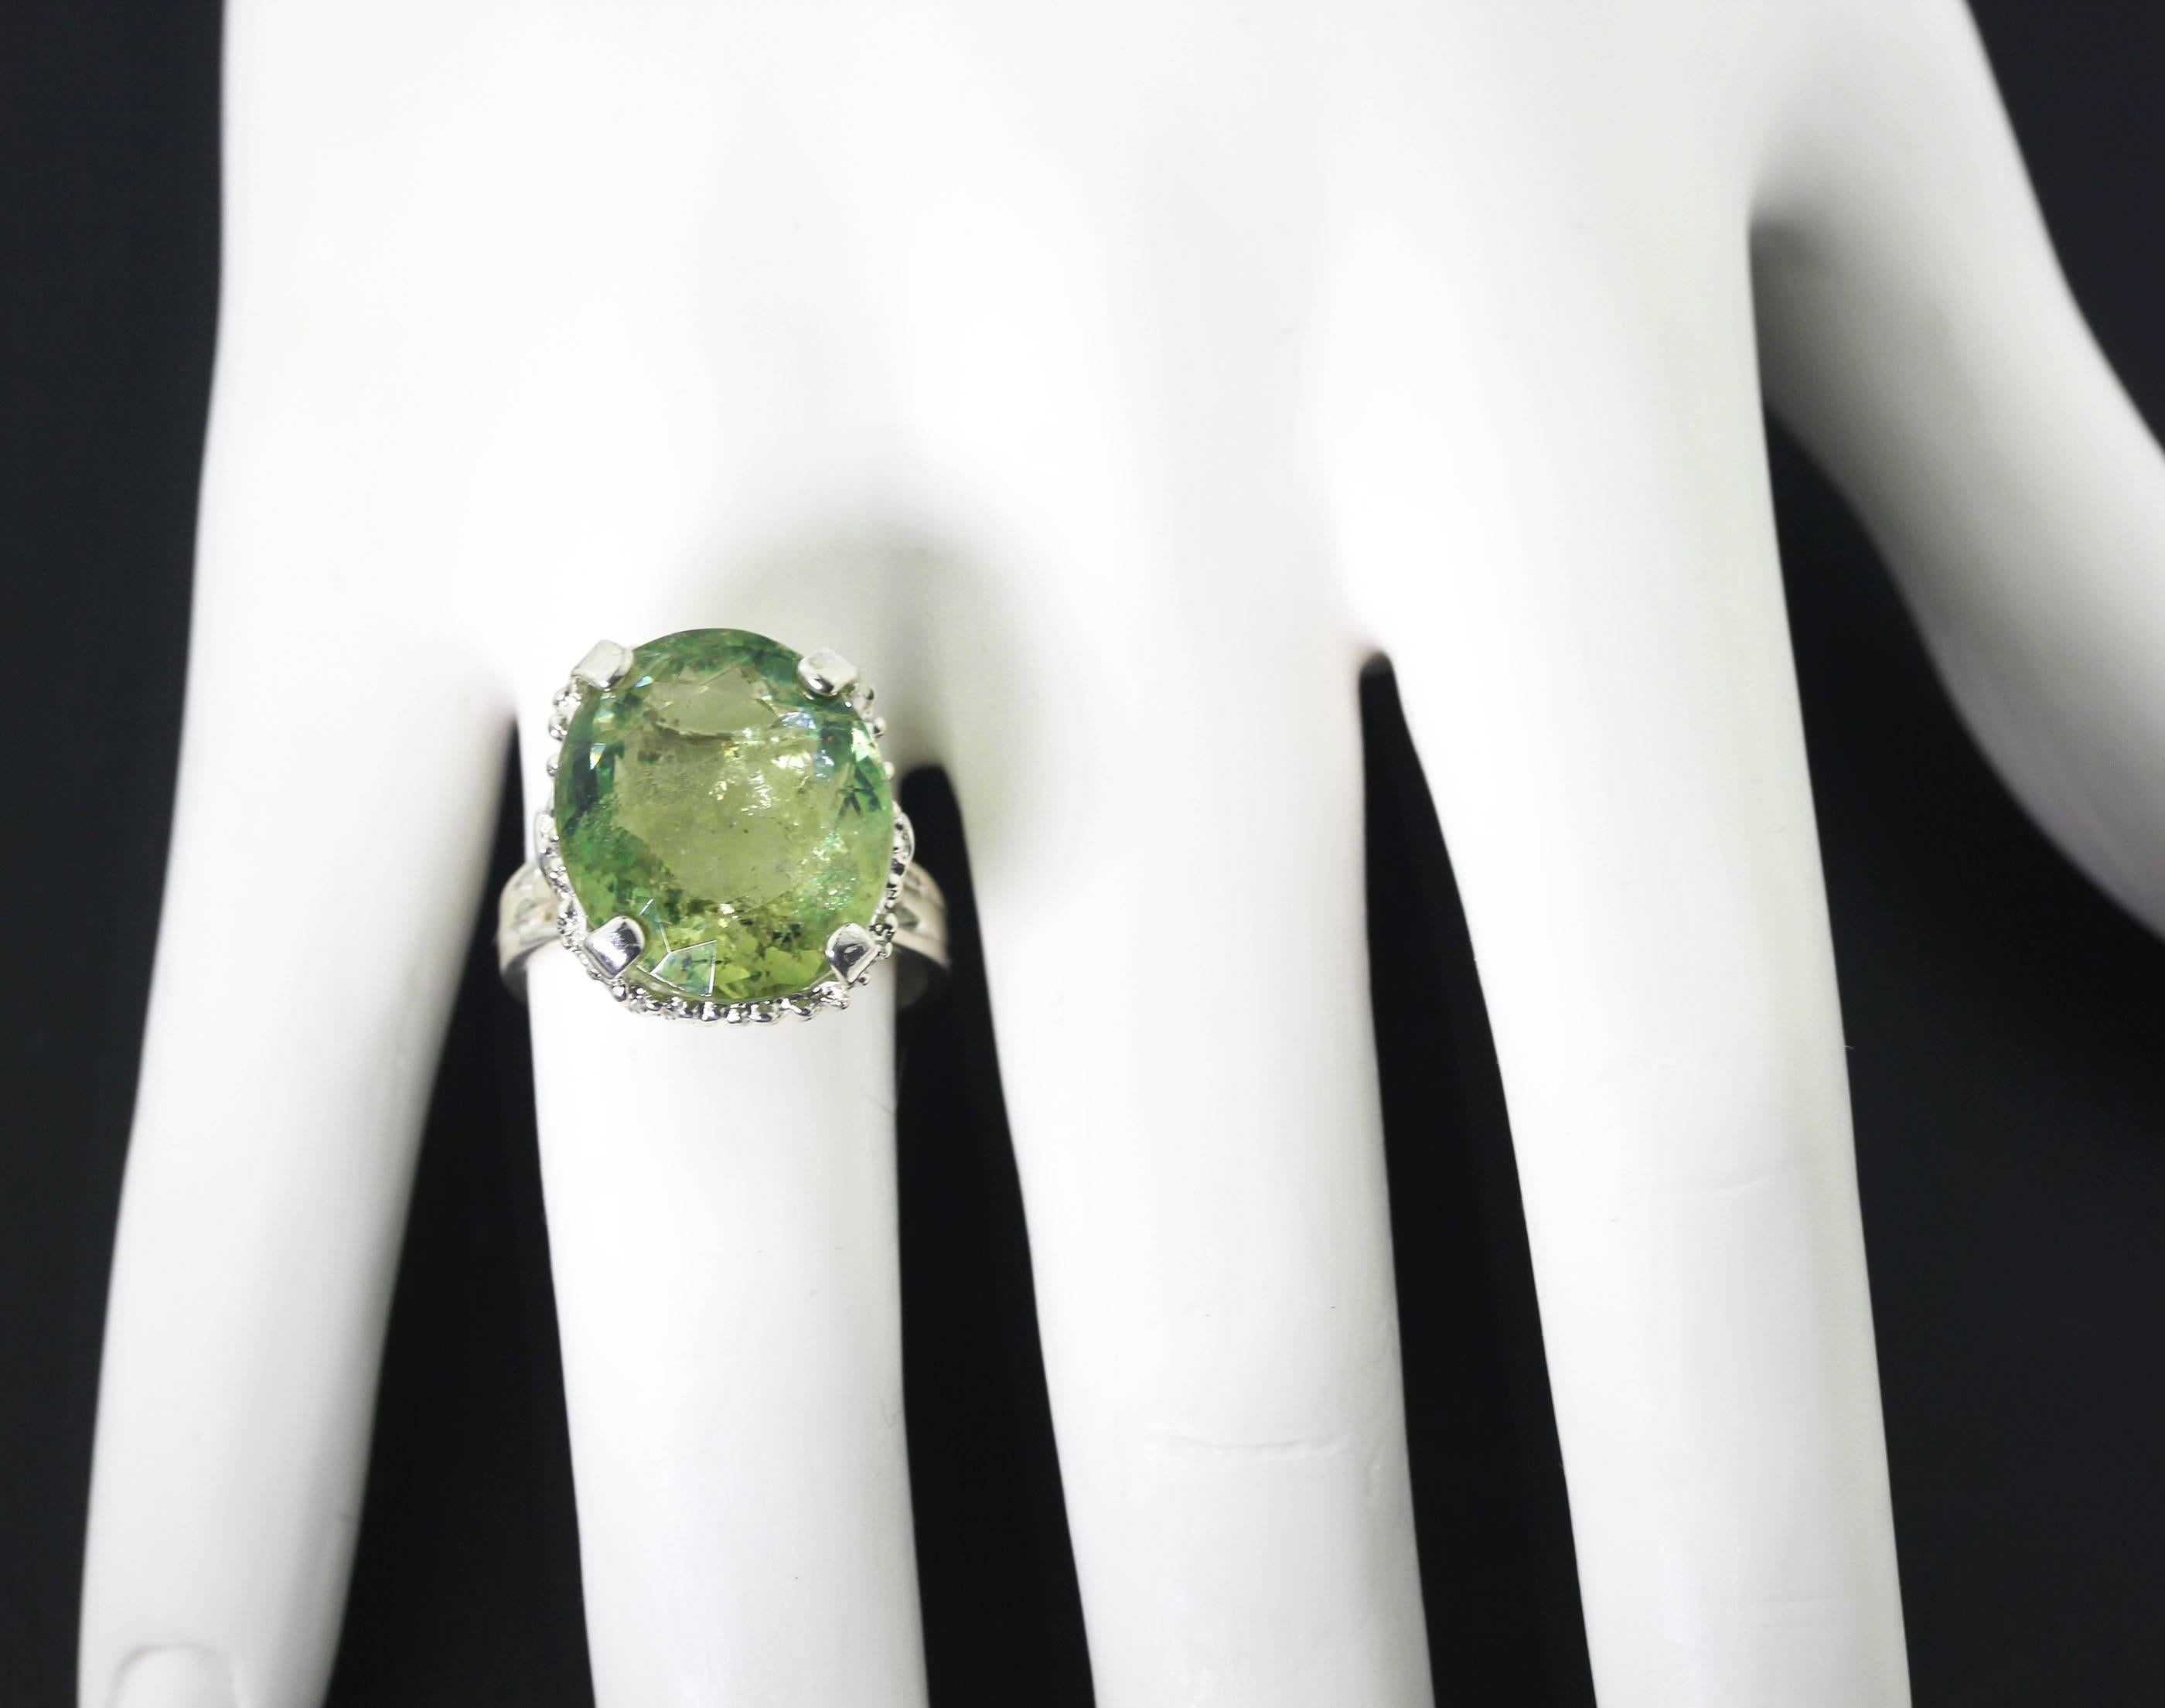 Natural Brazilian bright translucent green Tourmaline - 17.85 mm x 15.1 mm -  set in a unique handmade sterling silver ring size 8.5 (sizable).  More from this seller by putting gemjunky into 1stdibs search bar.
